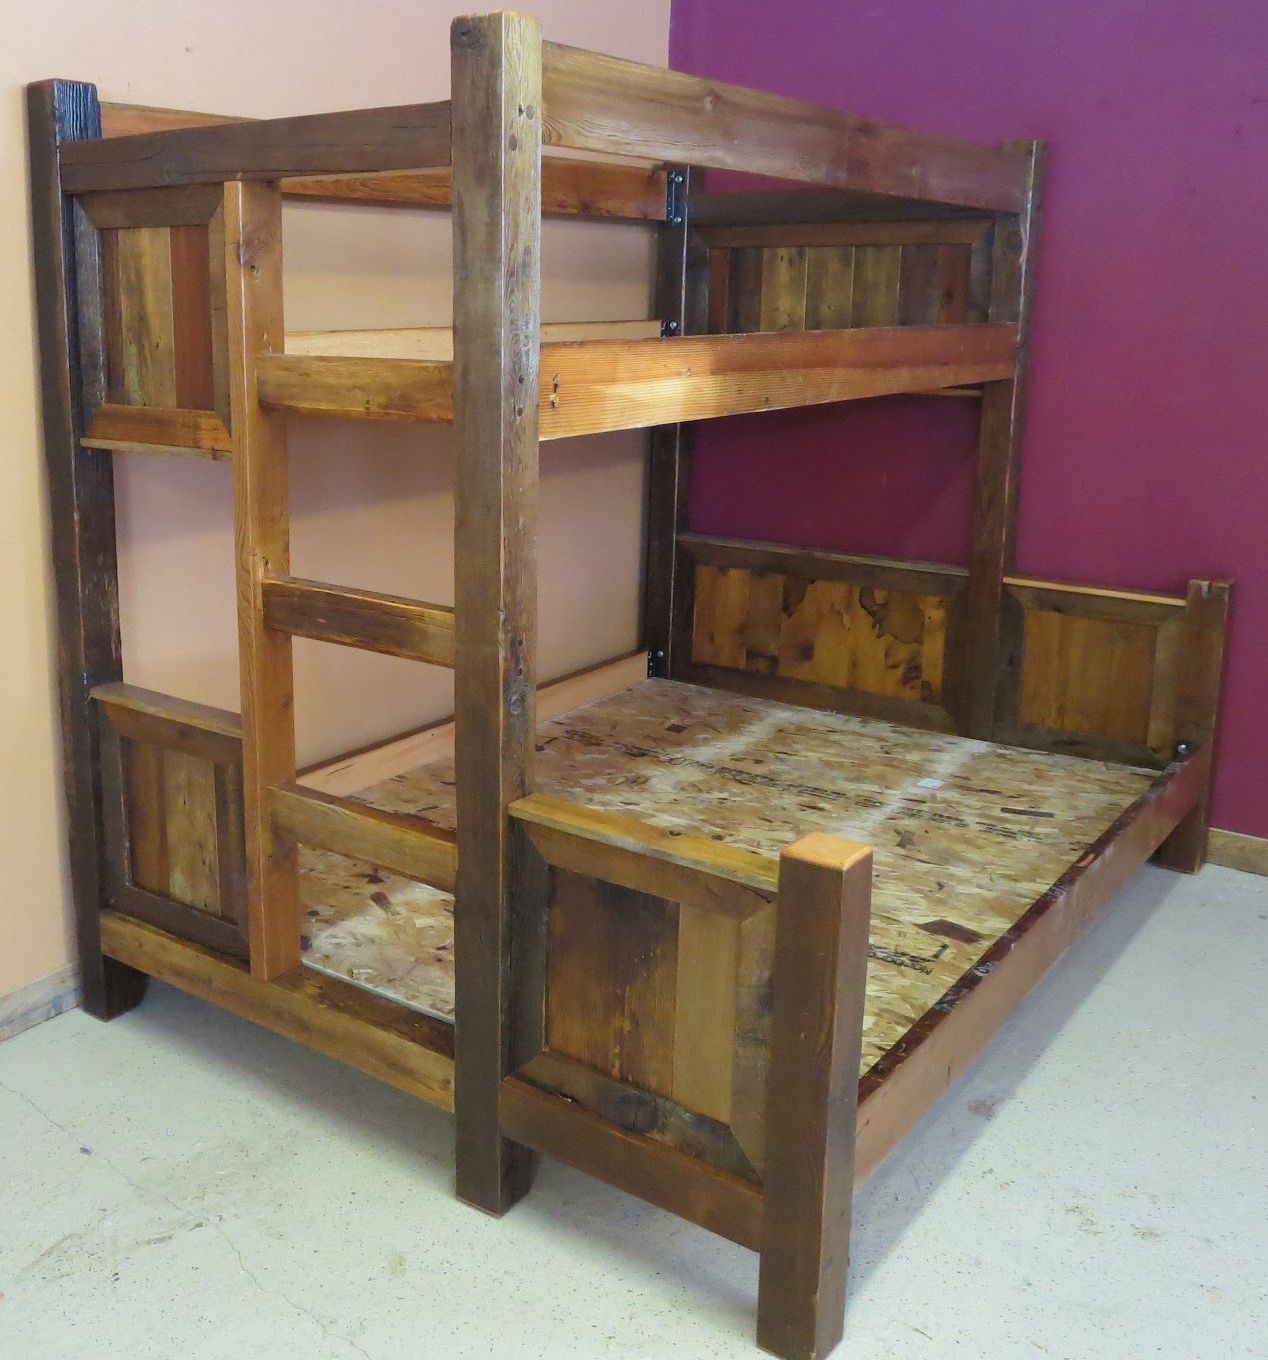 Barnwood Bunk Beds Twin Over Full, Old Wooden Bunk Beds